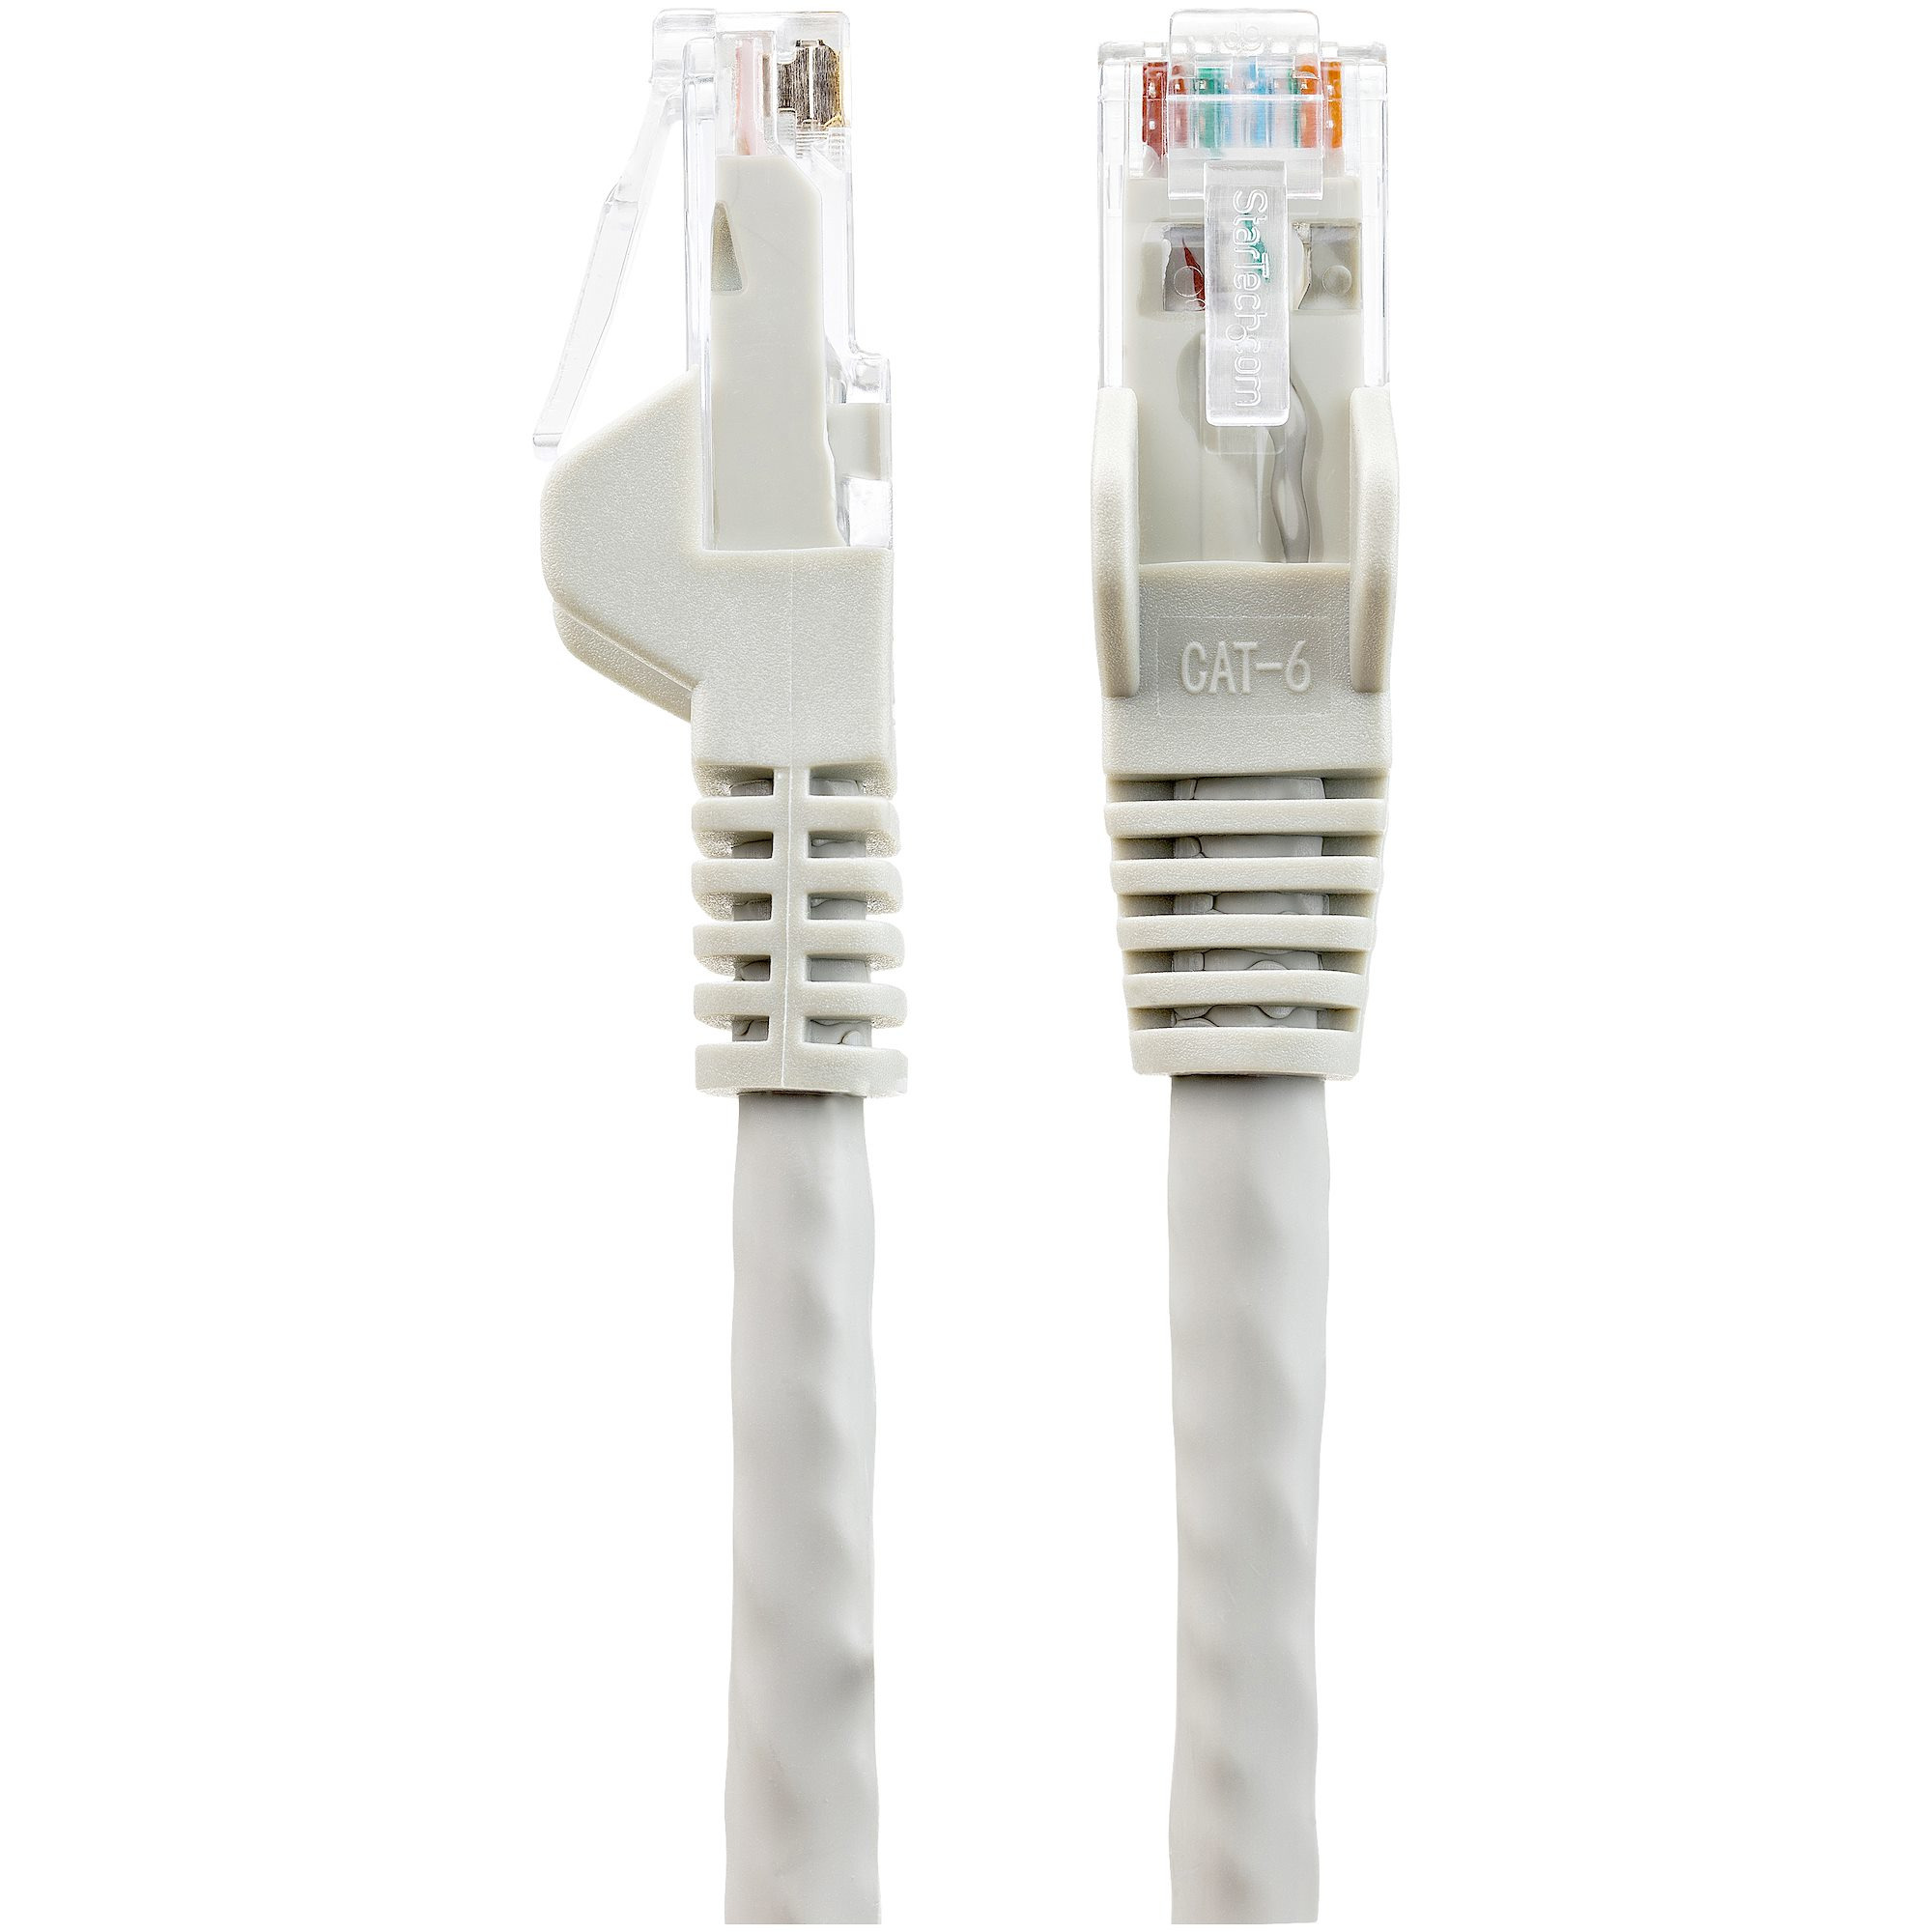 Startech : 2M CAT6 WHITE SNAGLESS GIGABIT ETHERNET RJ45 cable MALE TO MALE